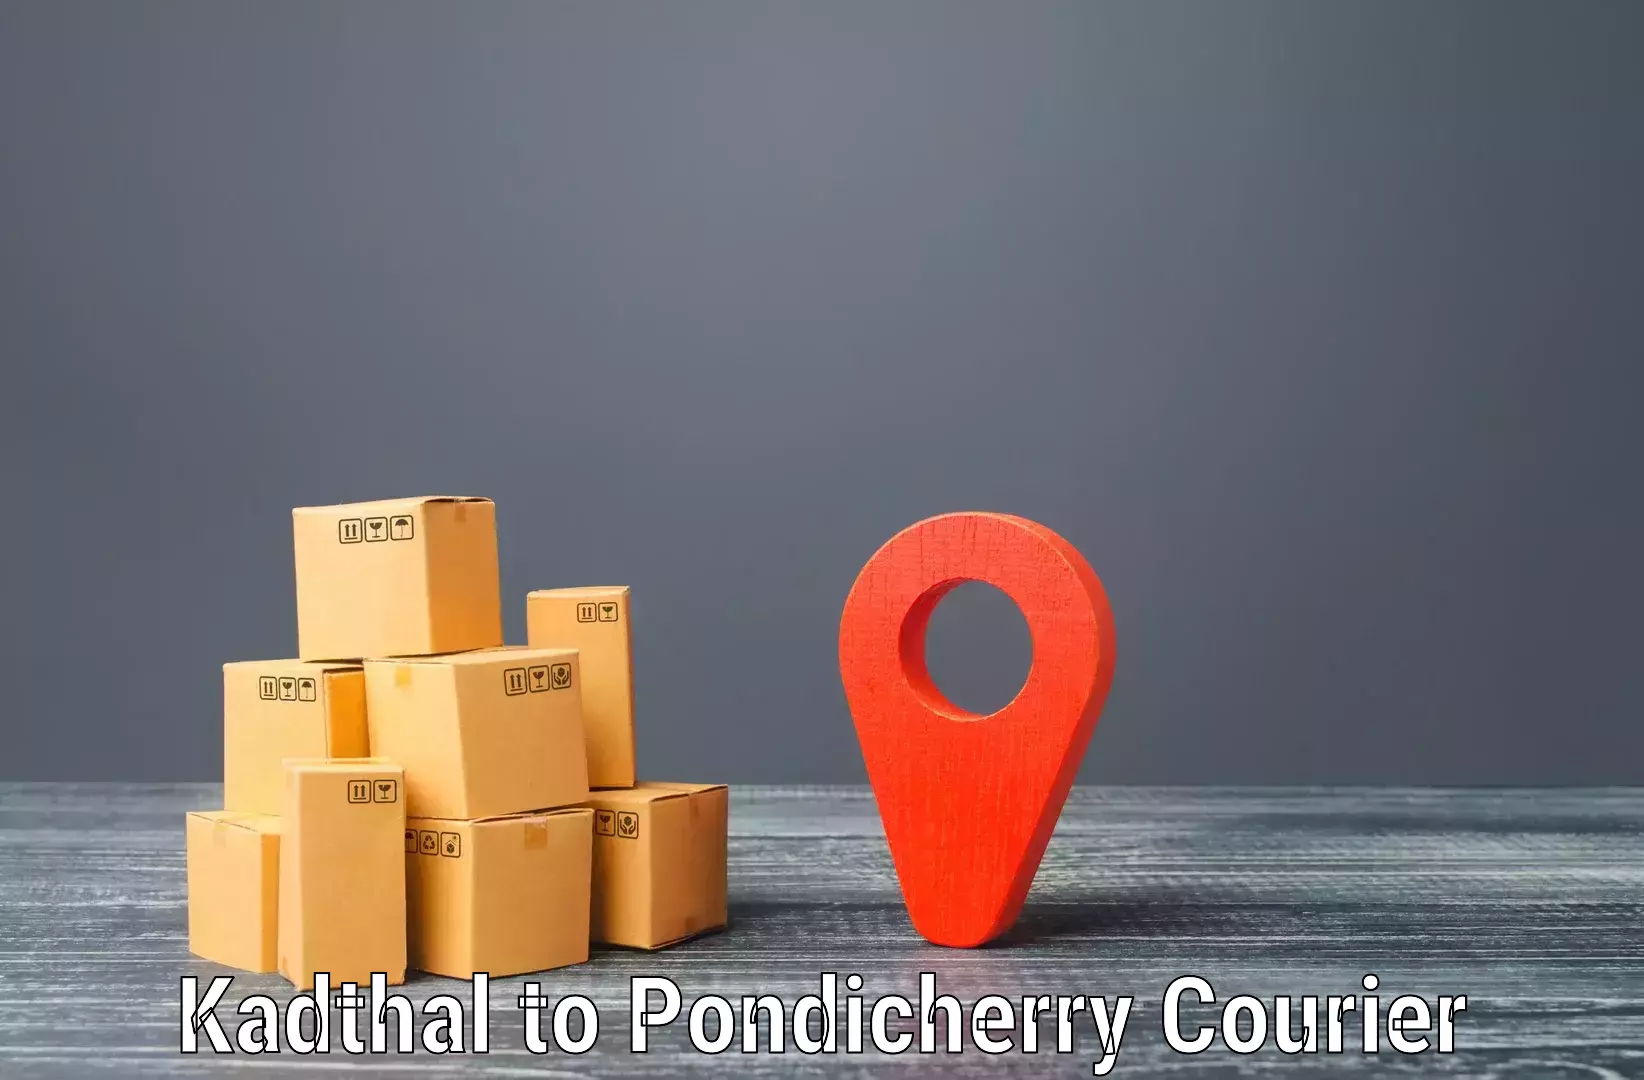 Flexible delivery scheduling Kadthal to Pondicherry University